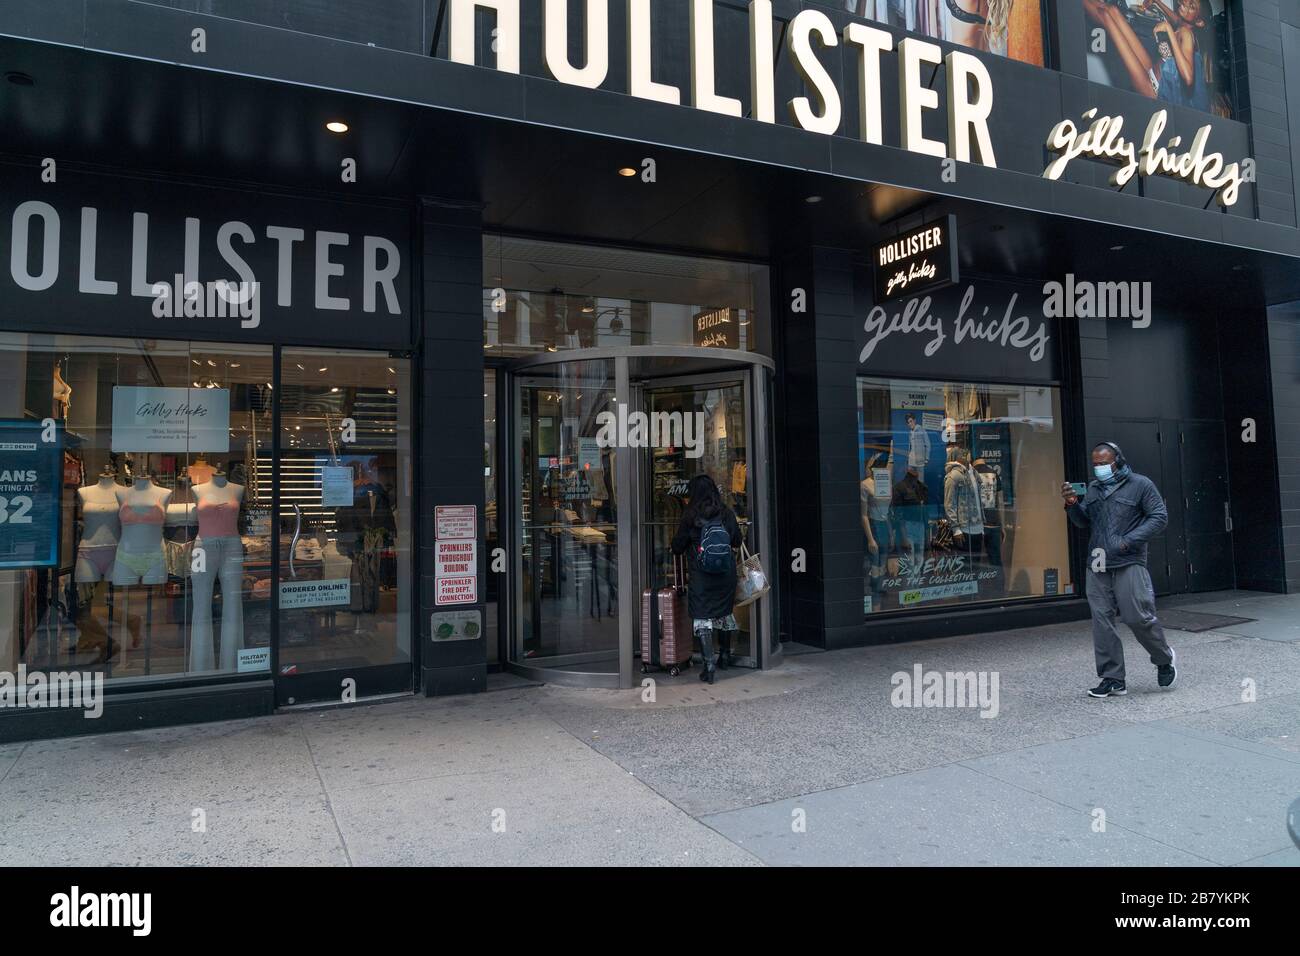 hollister yonkers ny